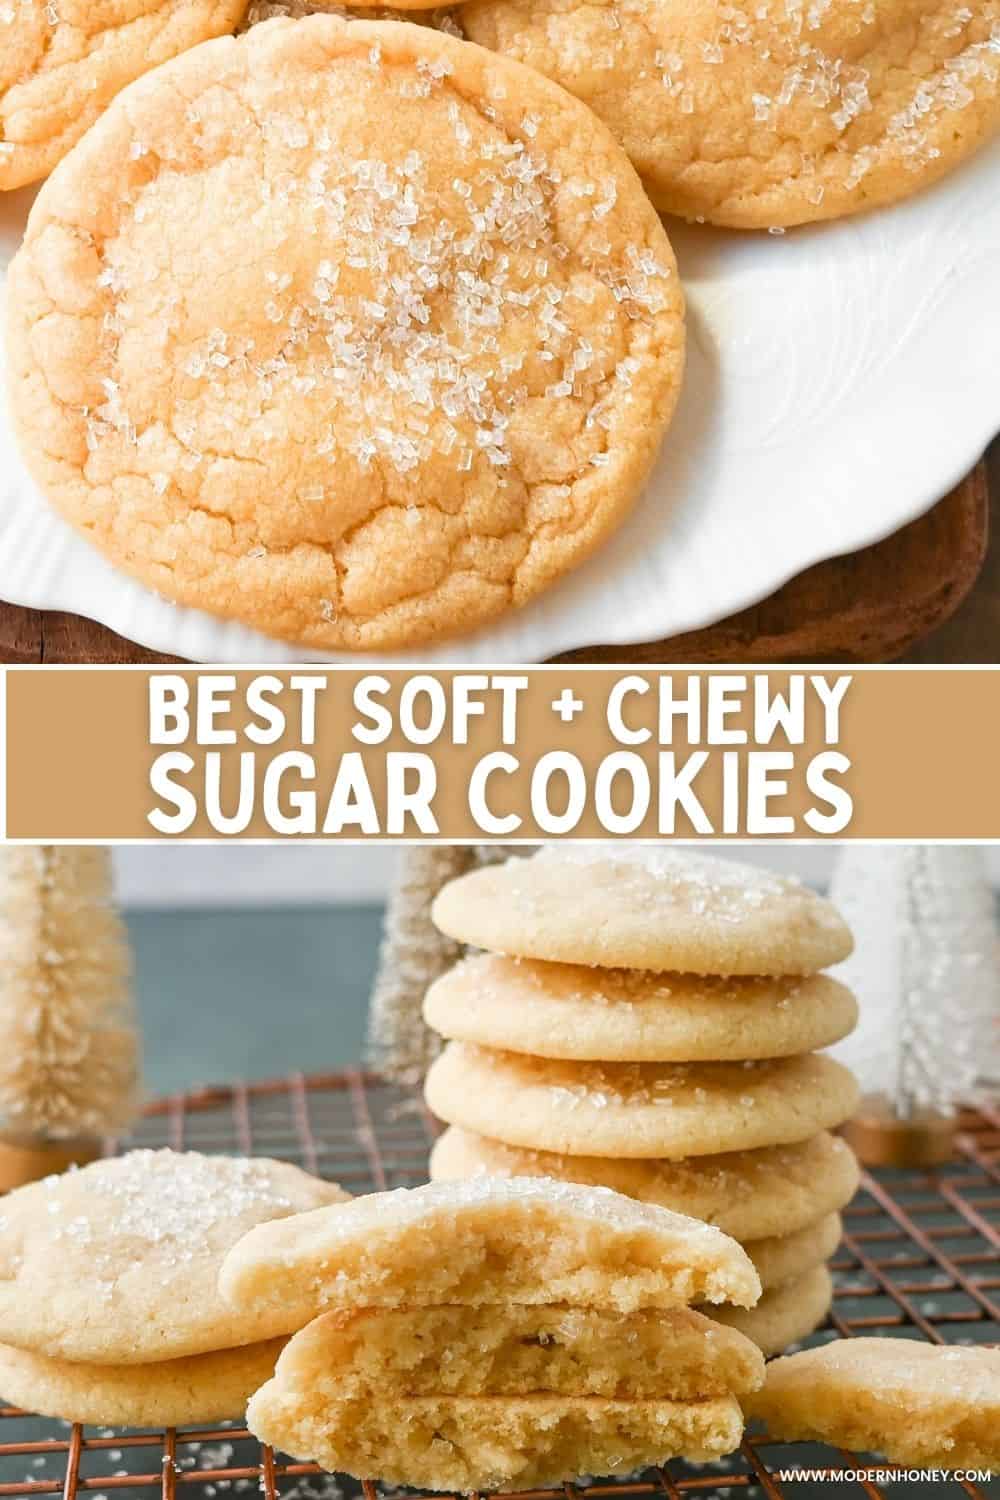 Best Soft Sugar Cookies. This is the best soft and chewy sugar cookie recipe that is so quick and easy. A classic sugar cookie recipe that doesn't even need frosting!